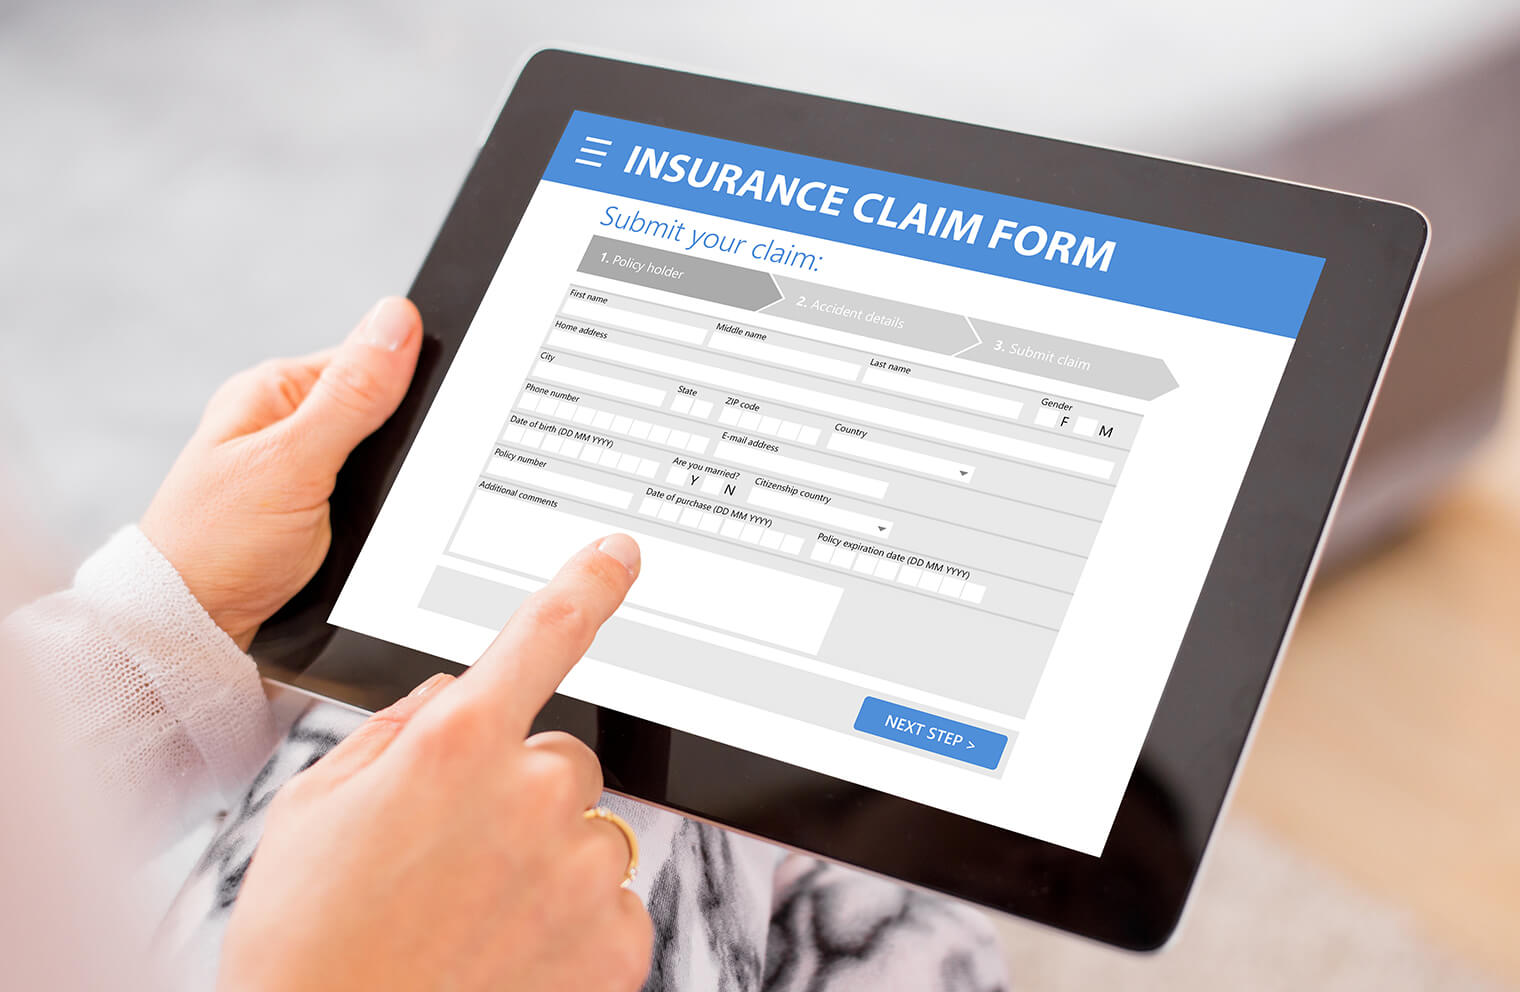 Close up picture of a woman's hands, using a tablet, completing an insurance claim form.